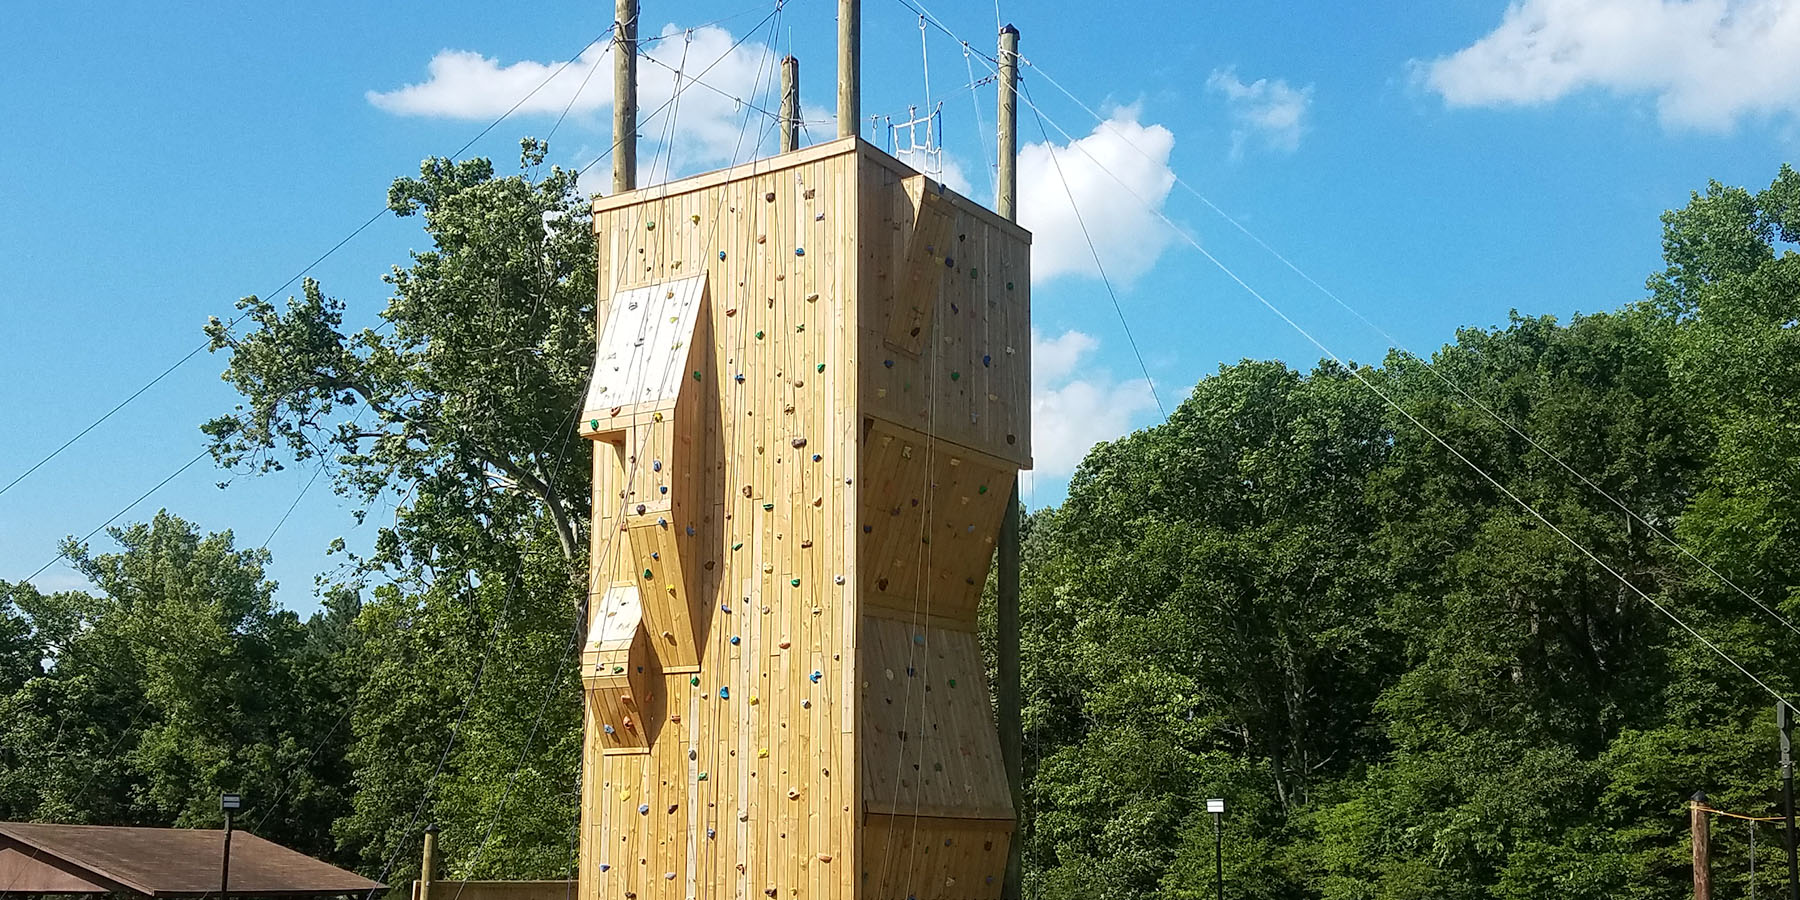 Outdoor climbing wall and tower designed and built by ABEE Inc.